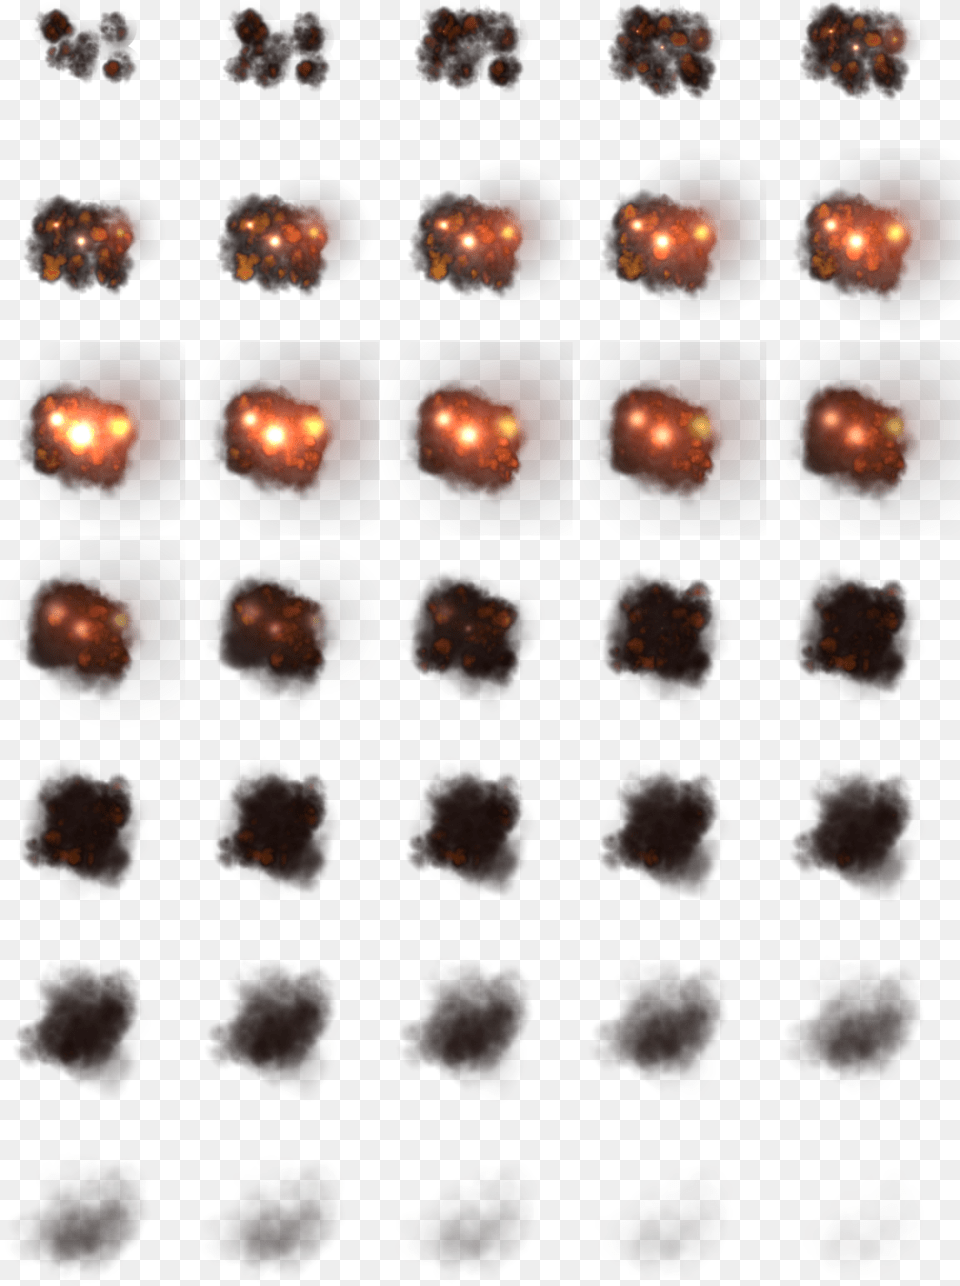 Here Is An Explosion Sprite Sheet That I Made For Cautious, Art, Collage, Sphere, Accessories Png